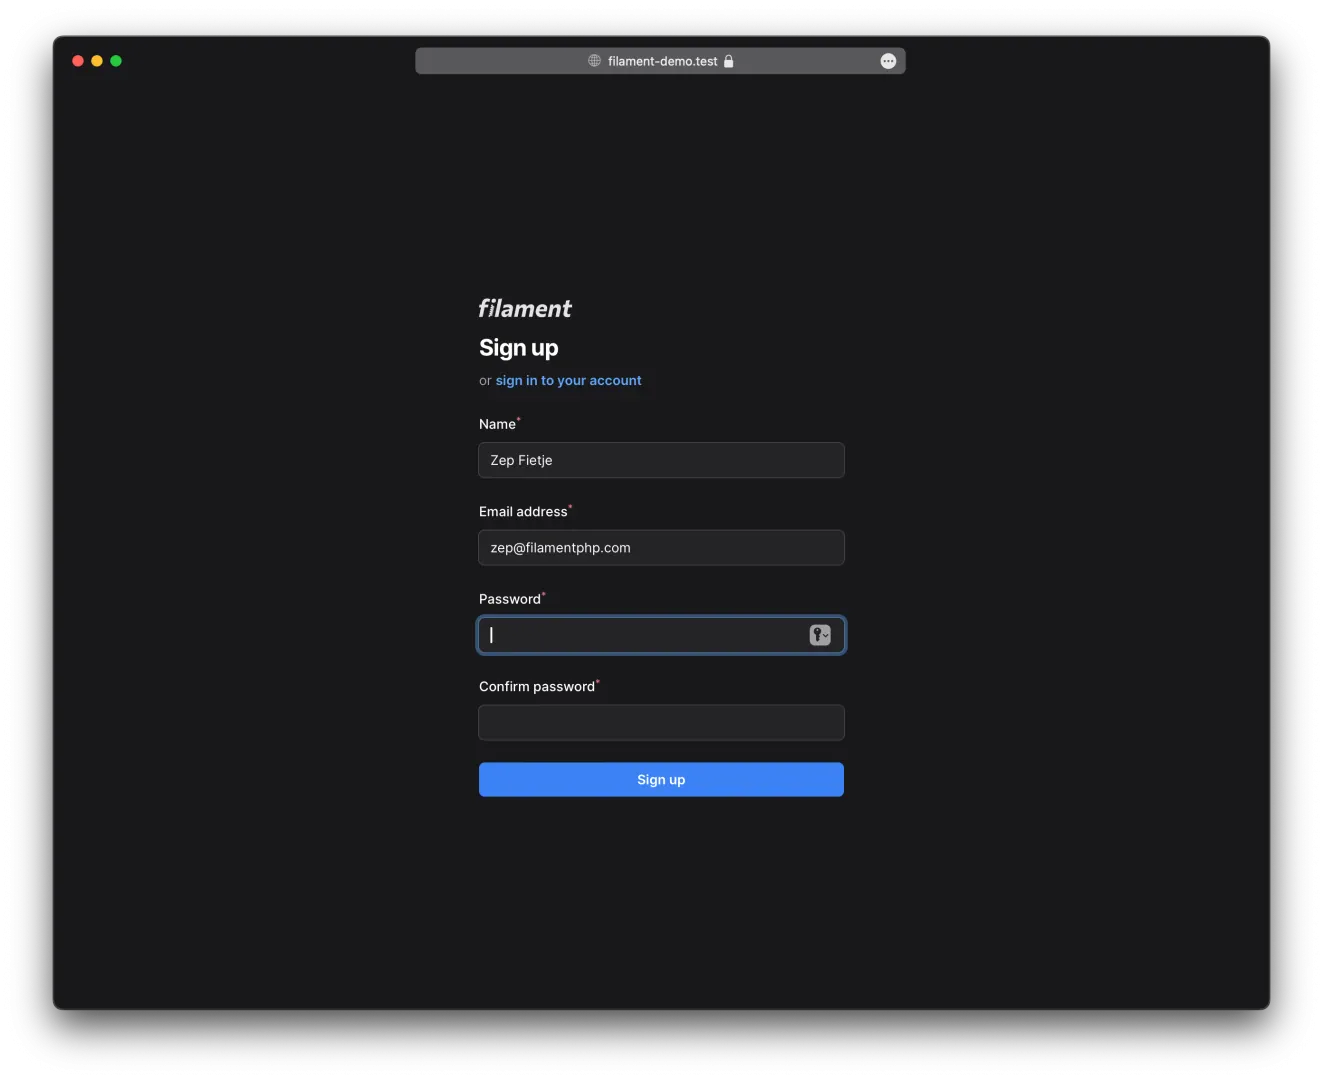 Screenshot of the registration page in light mode using the Filament Minimal Theme